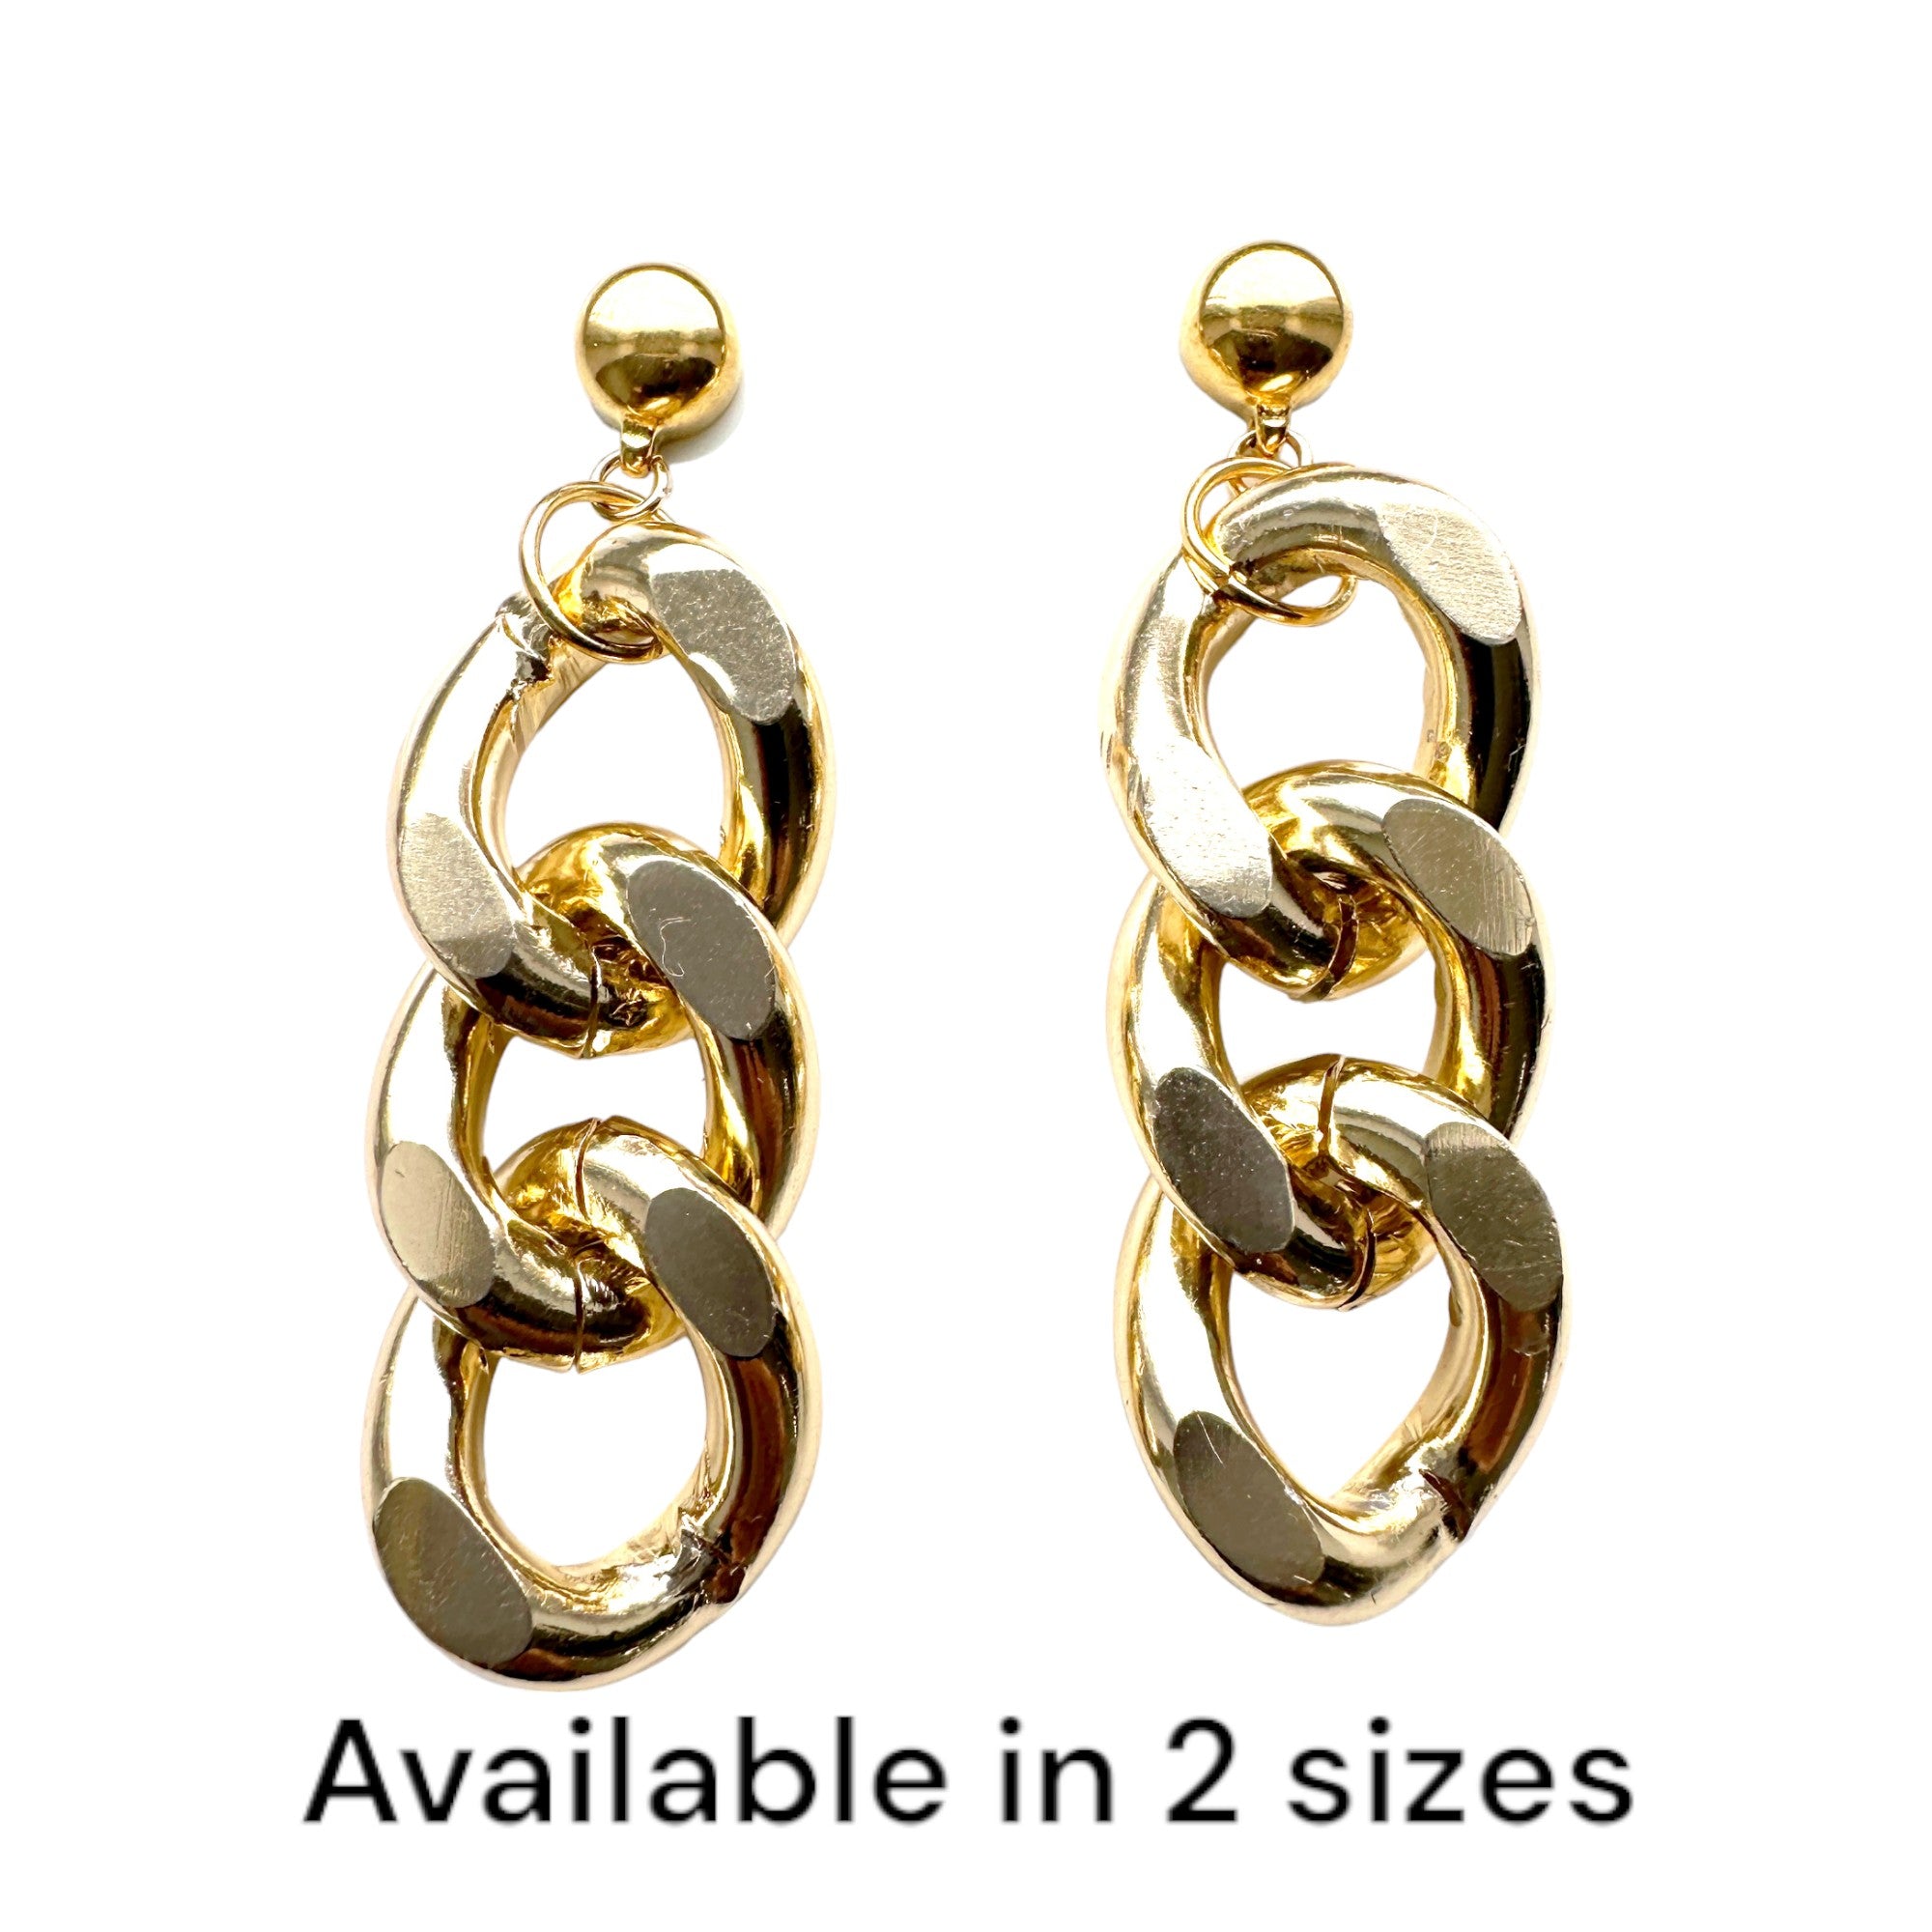 TI-GO Large gold chain earrings